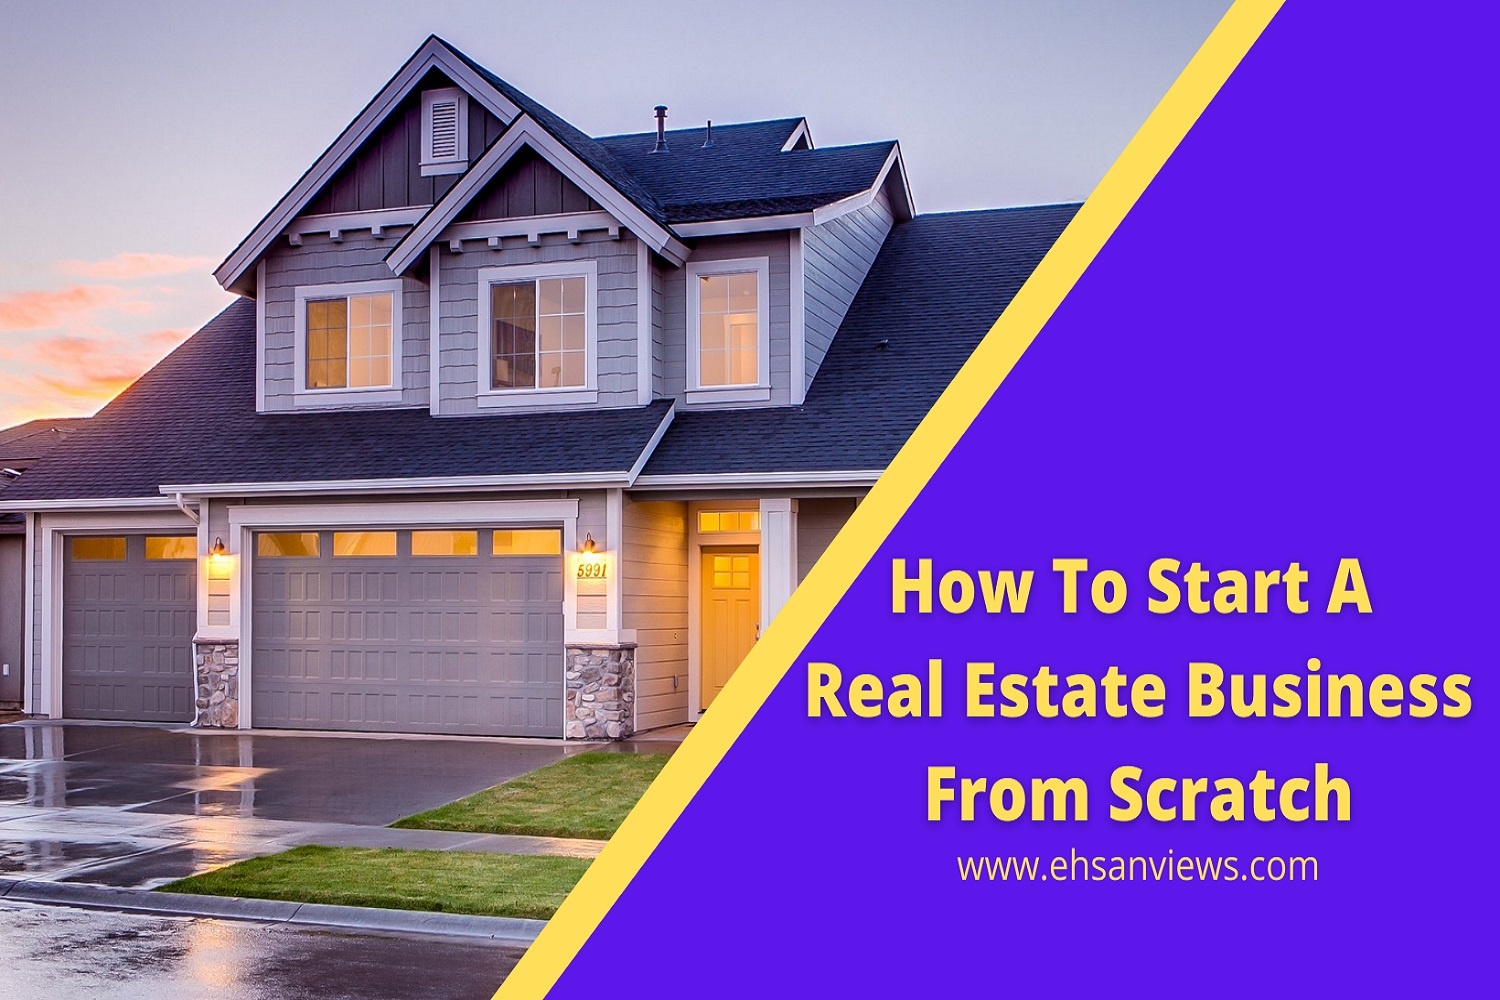 Complete Guide: How To Start A Real Estate Business From Scratch! | Abdul Ehsan | Entrepreneur and Digital Marketing Consultant in Sri Lanka